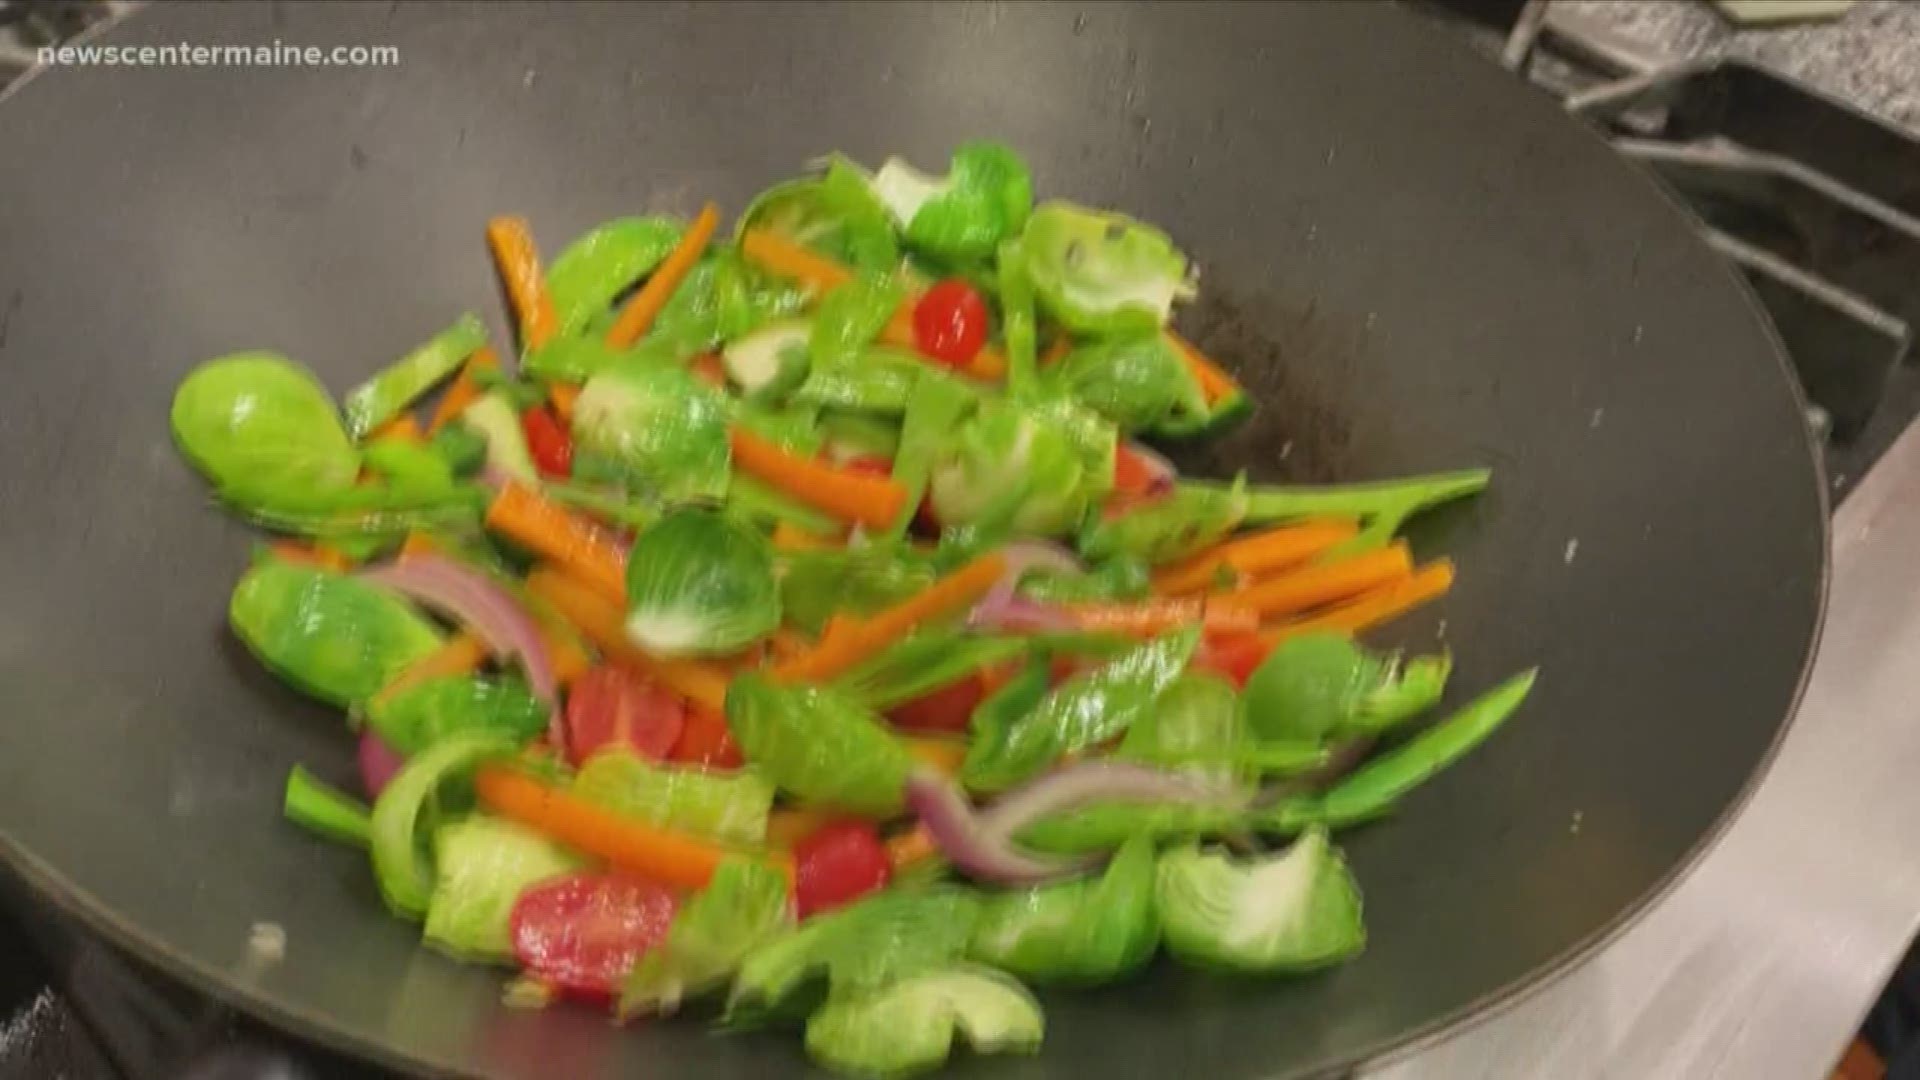 Chef David Turin makes a stir fry out of ingredients at home.